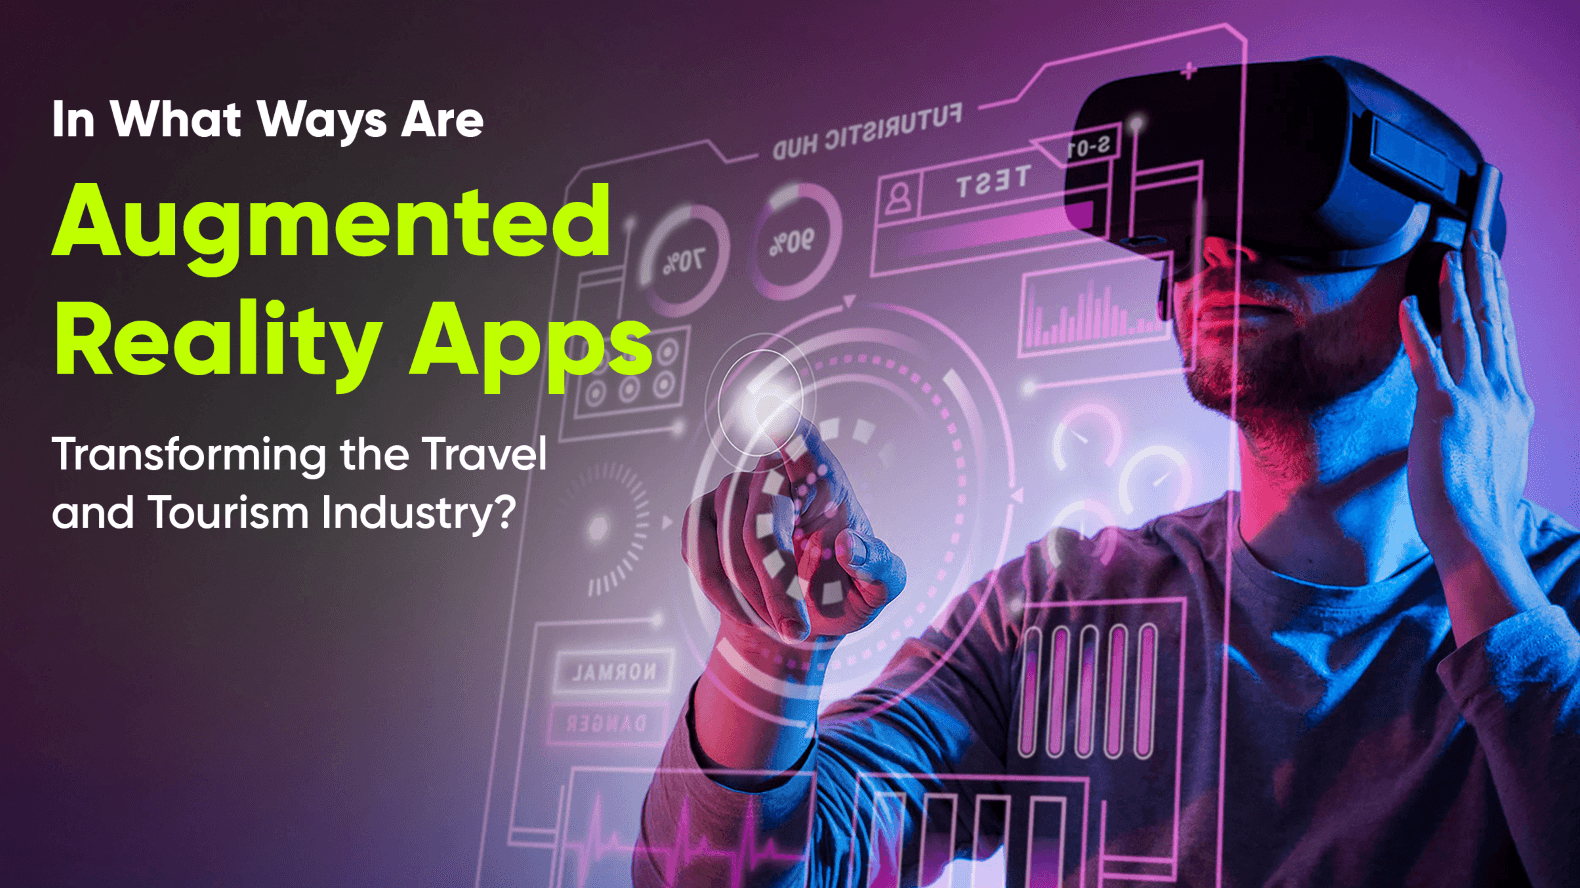 In What Ways Are Augmented Reality Apps Transforming the Travel and Tourism Industry?